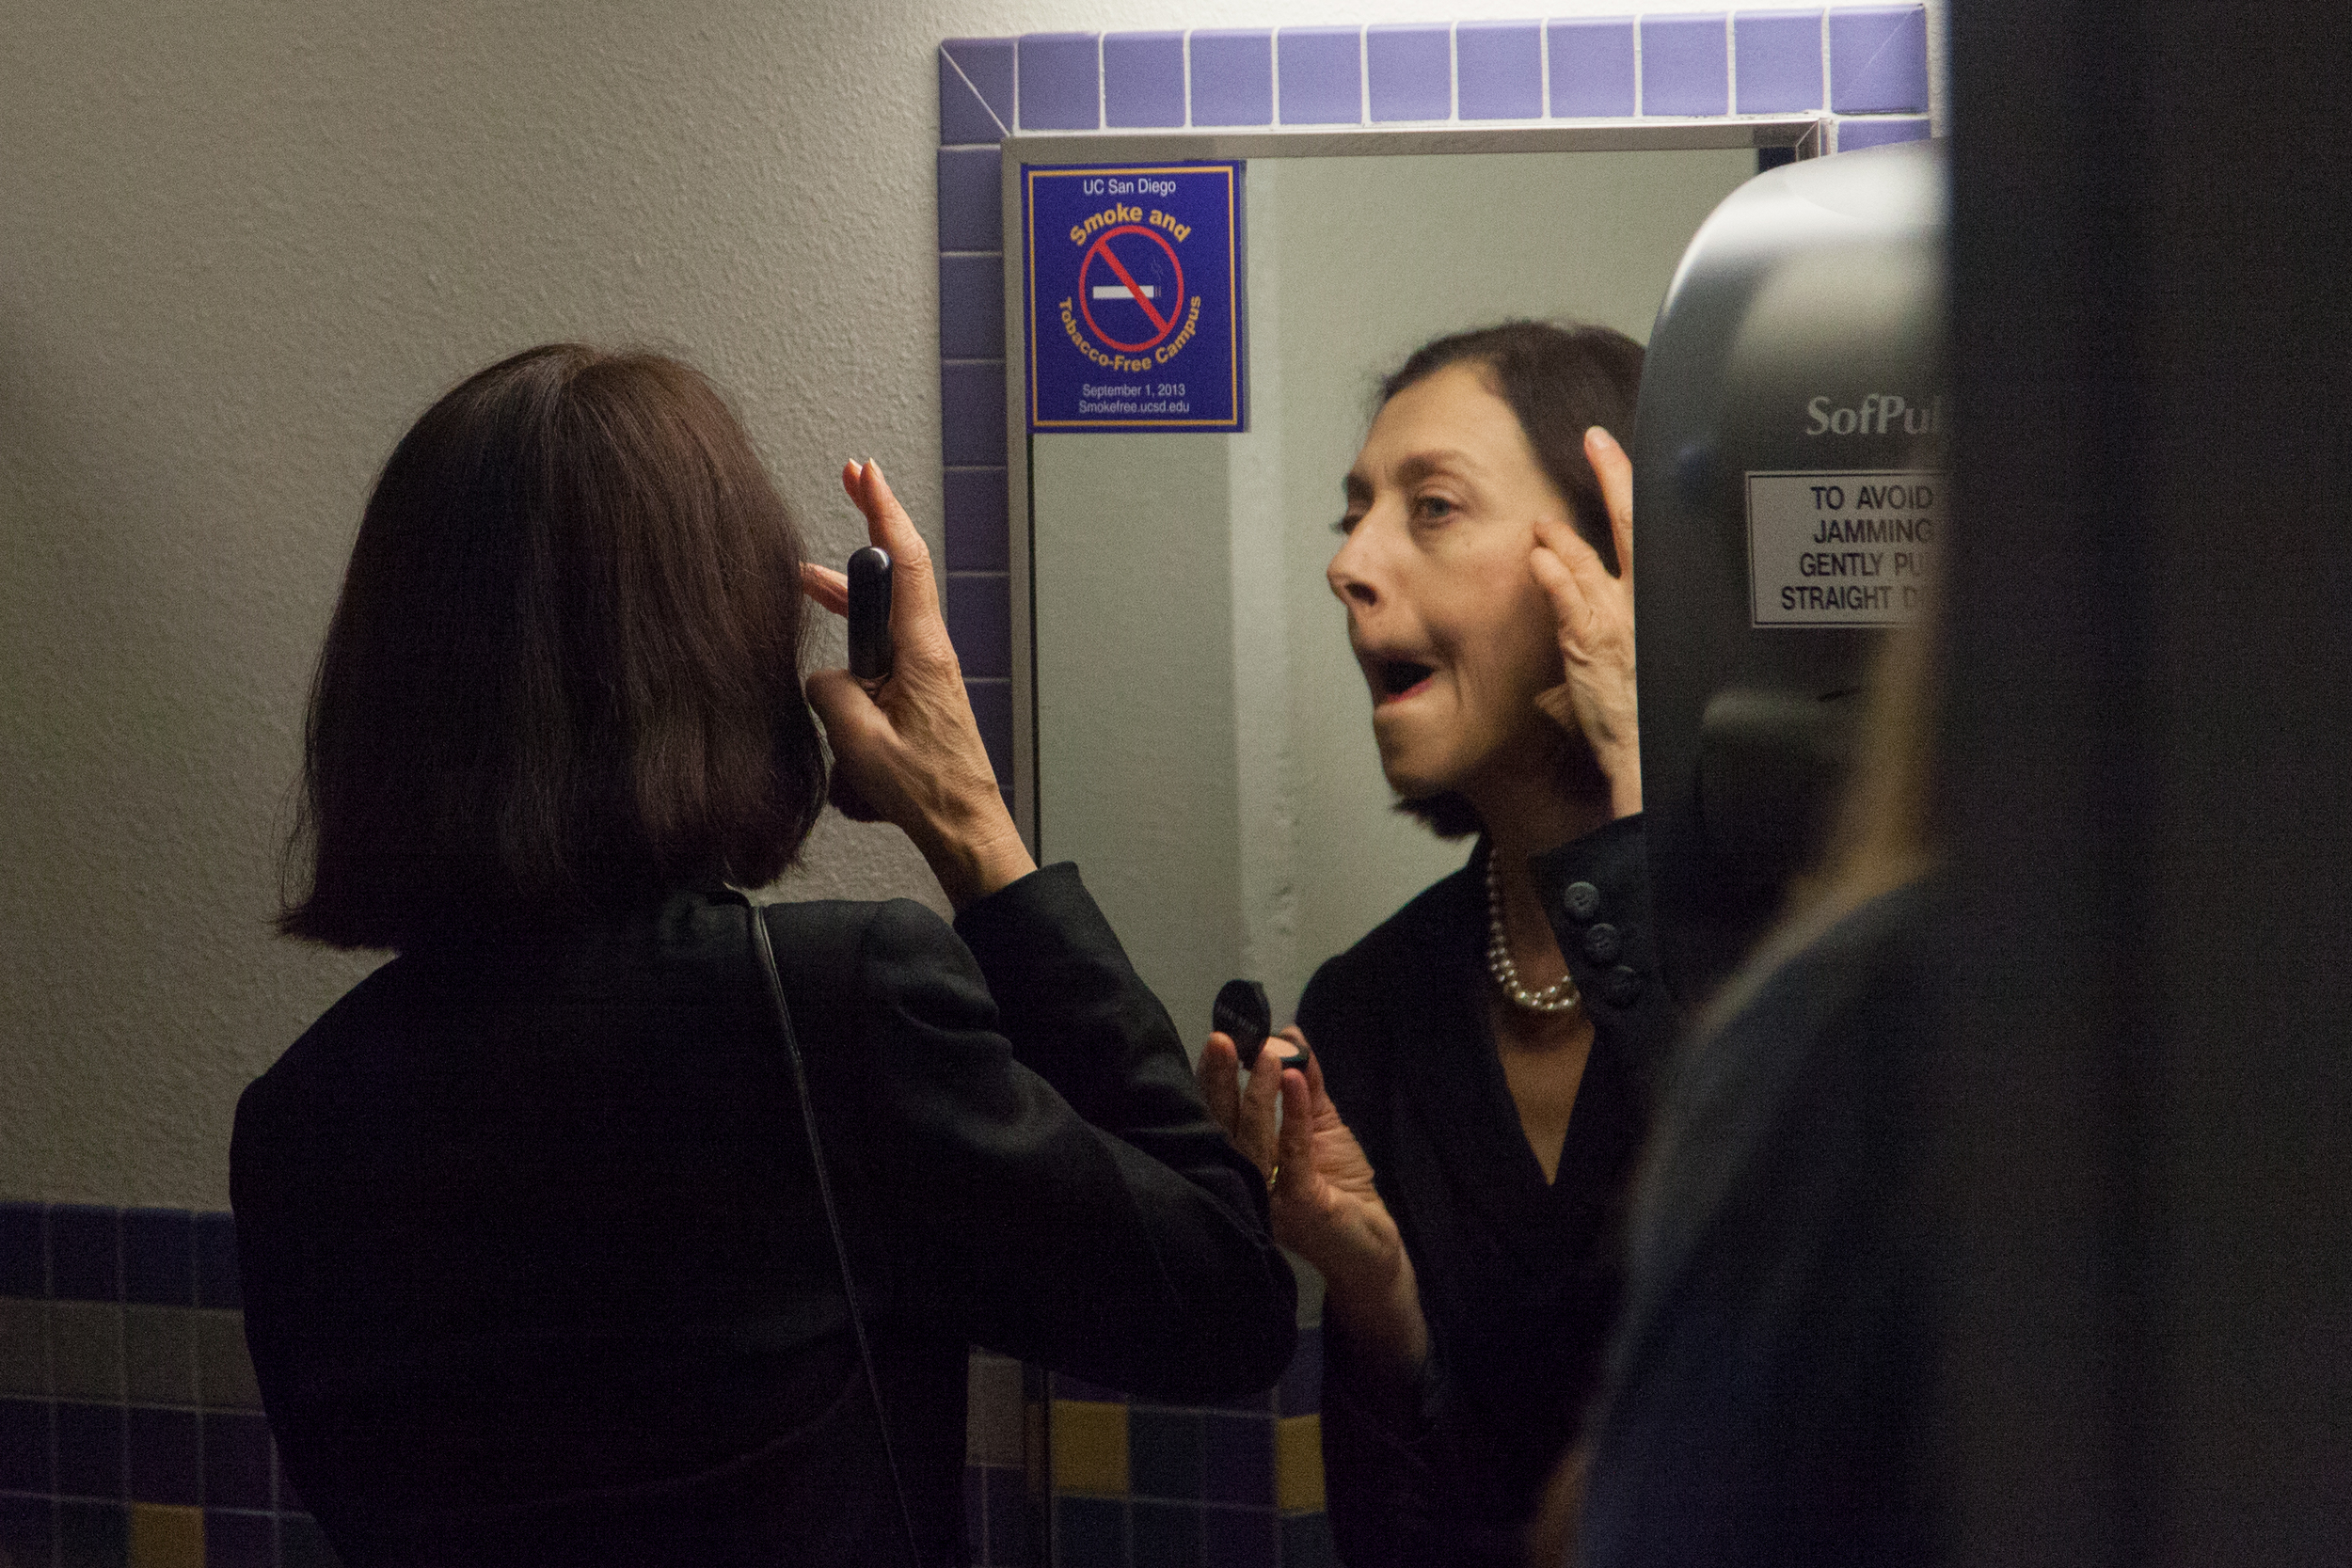 Gertrude (Eva Barnes) gives beauty advice to the audience in the bathroom.